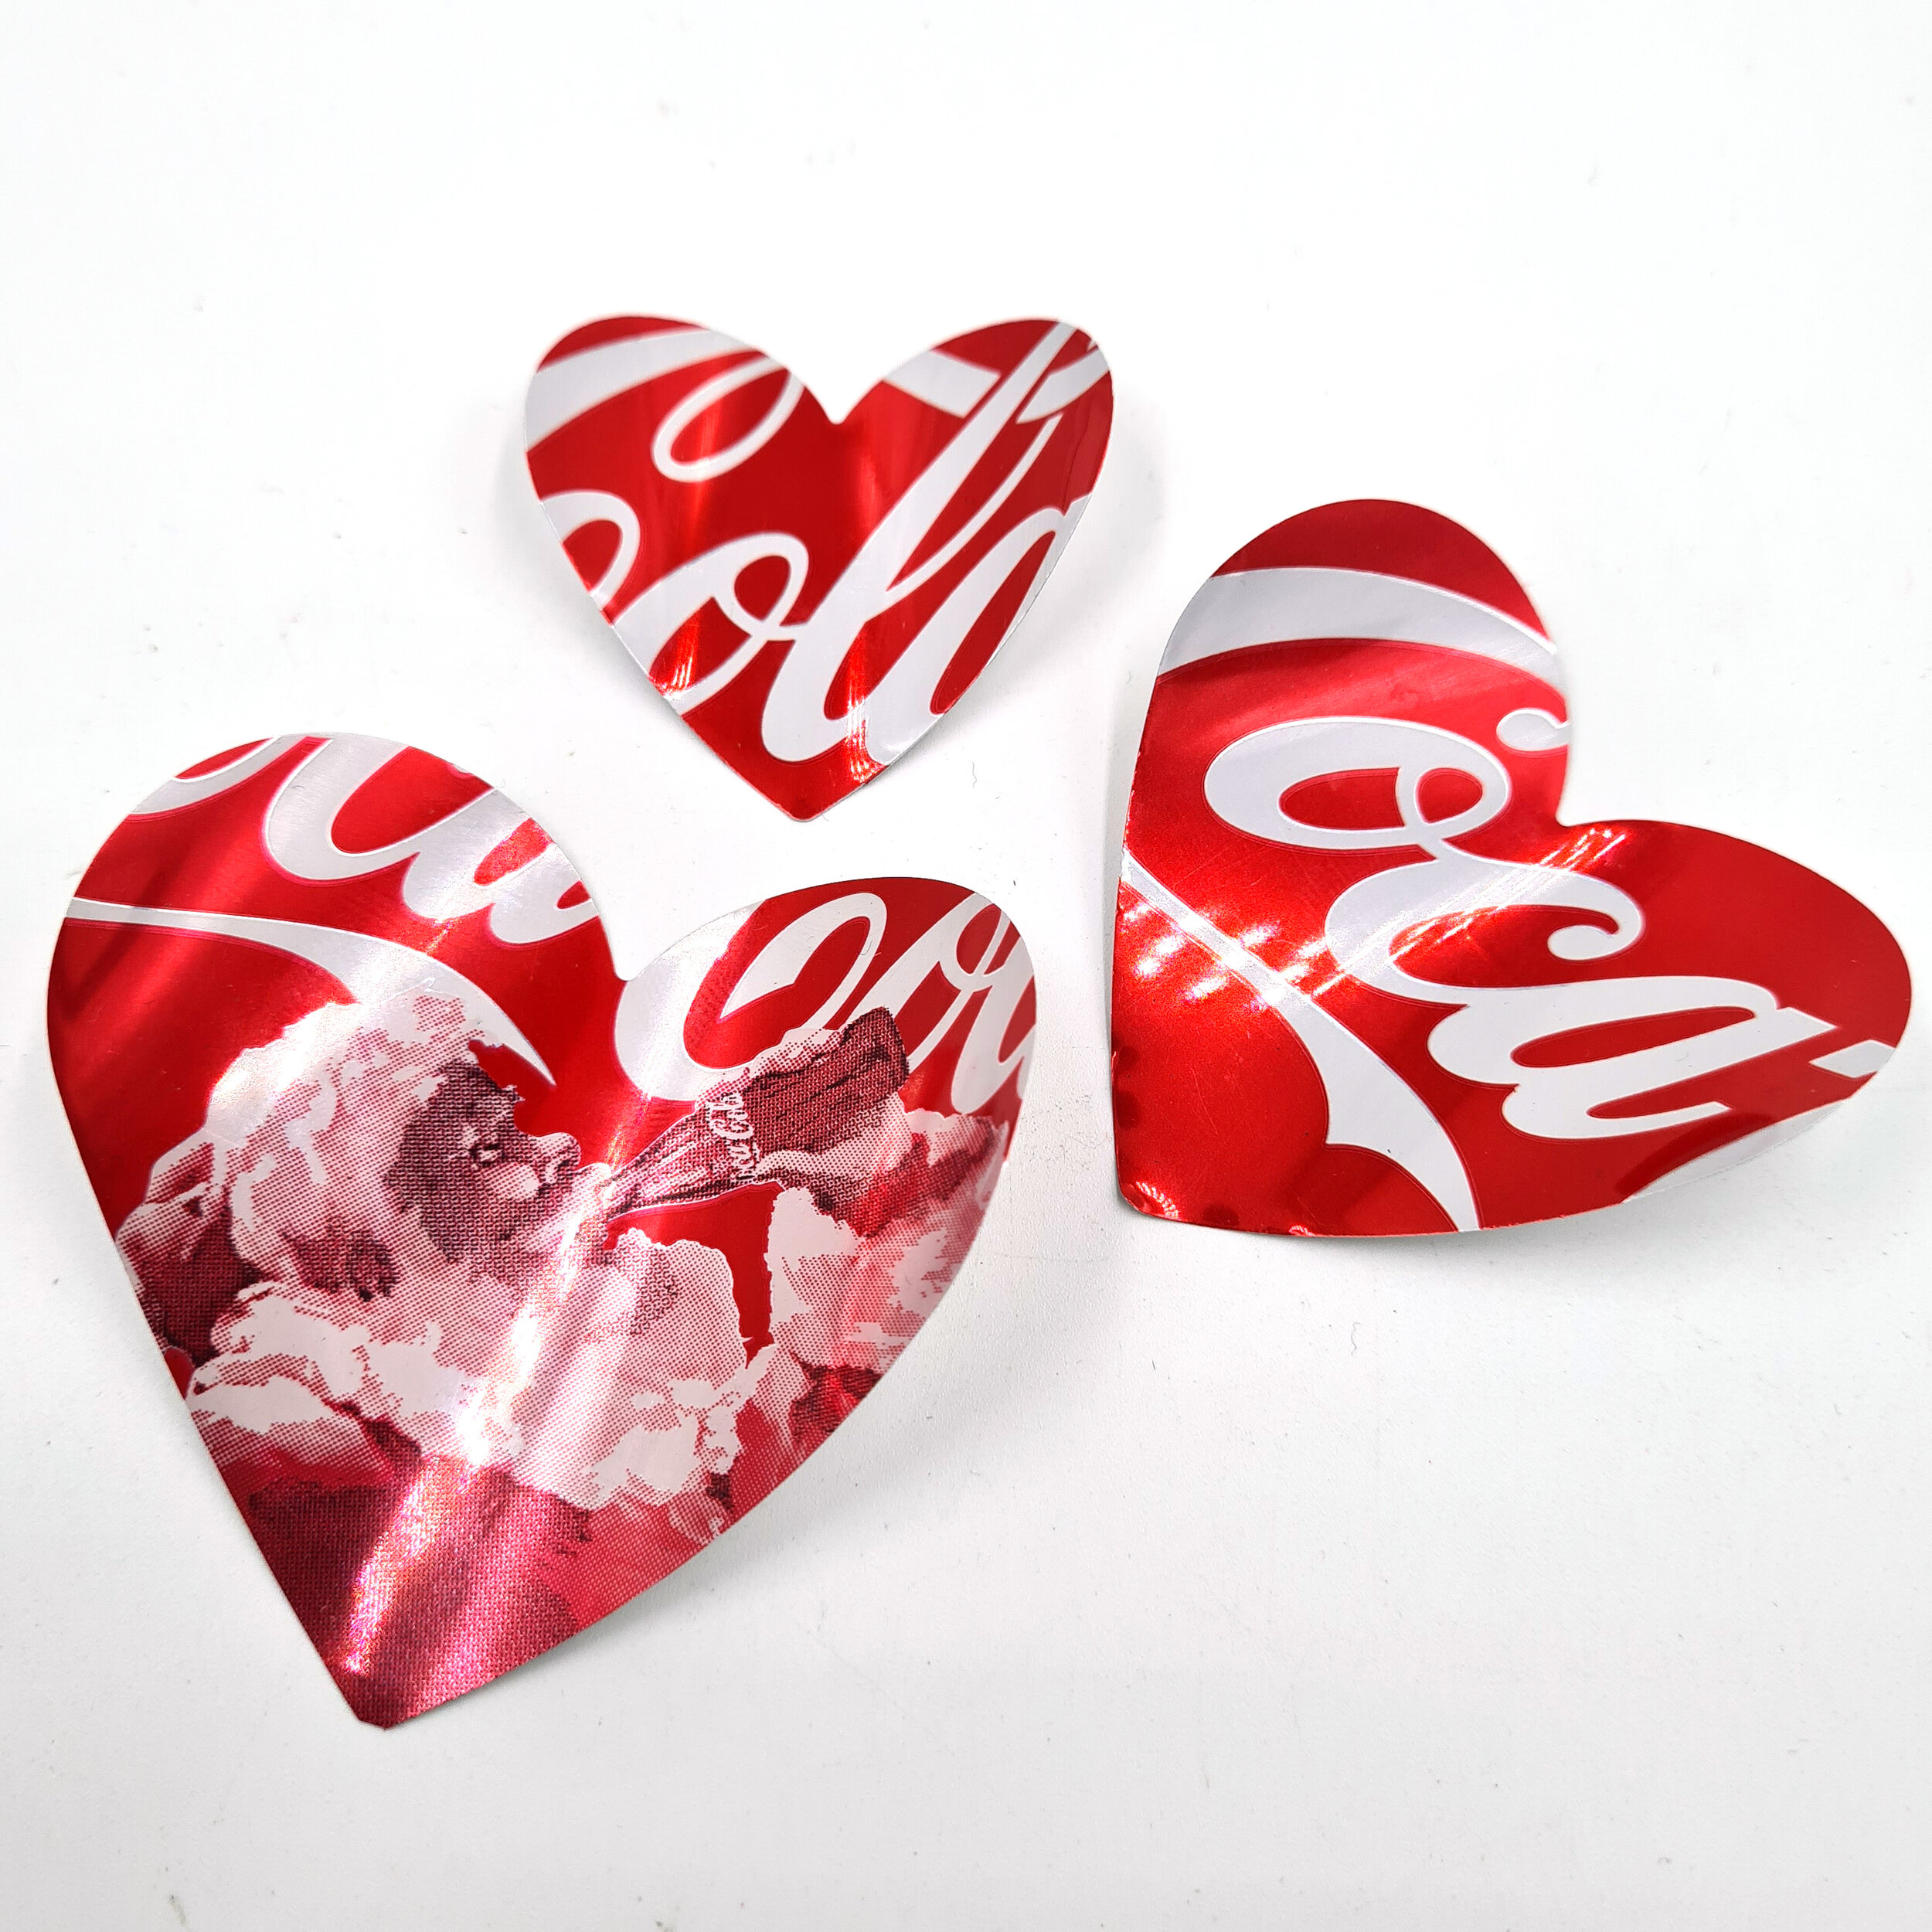 Special festive Santa Coca-Cola hand made Heart Can Magnets